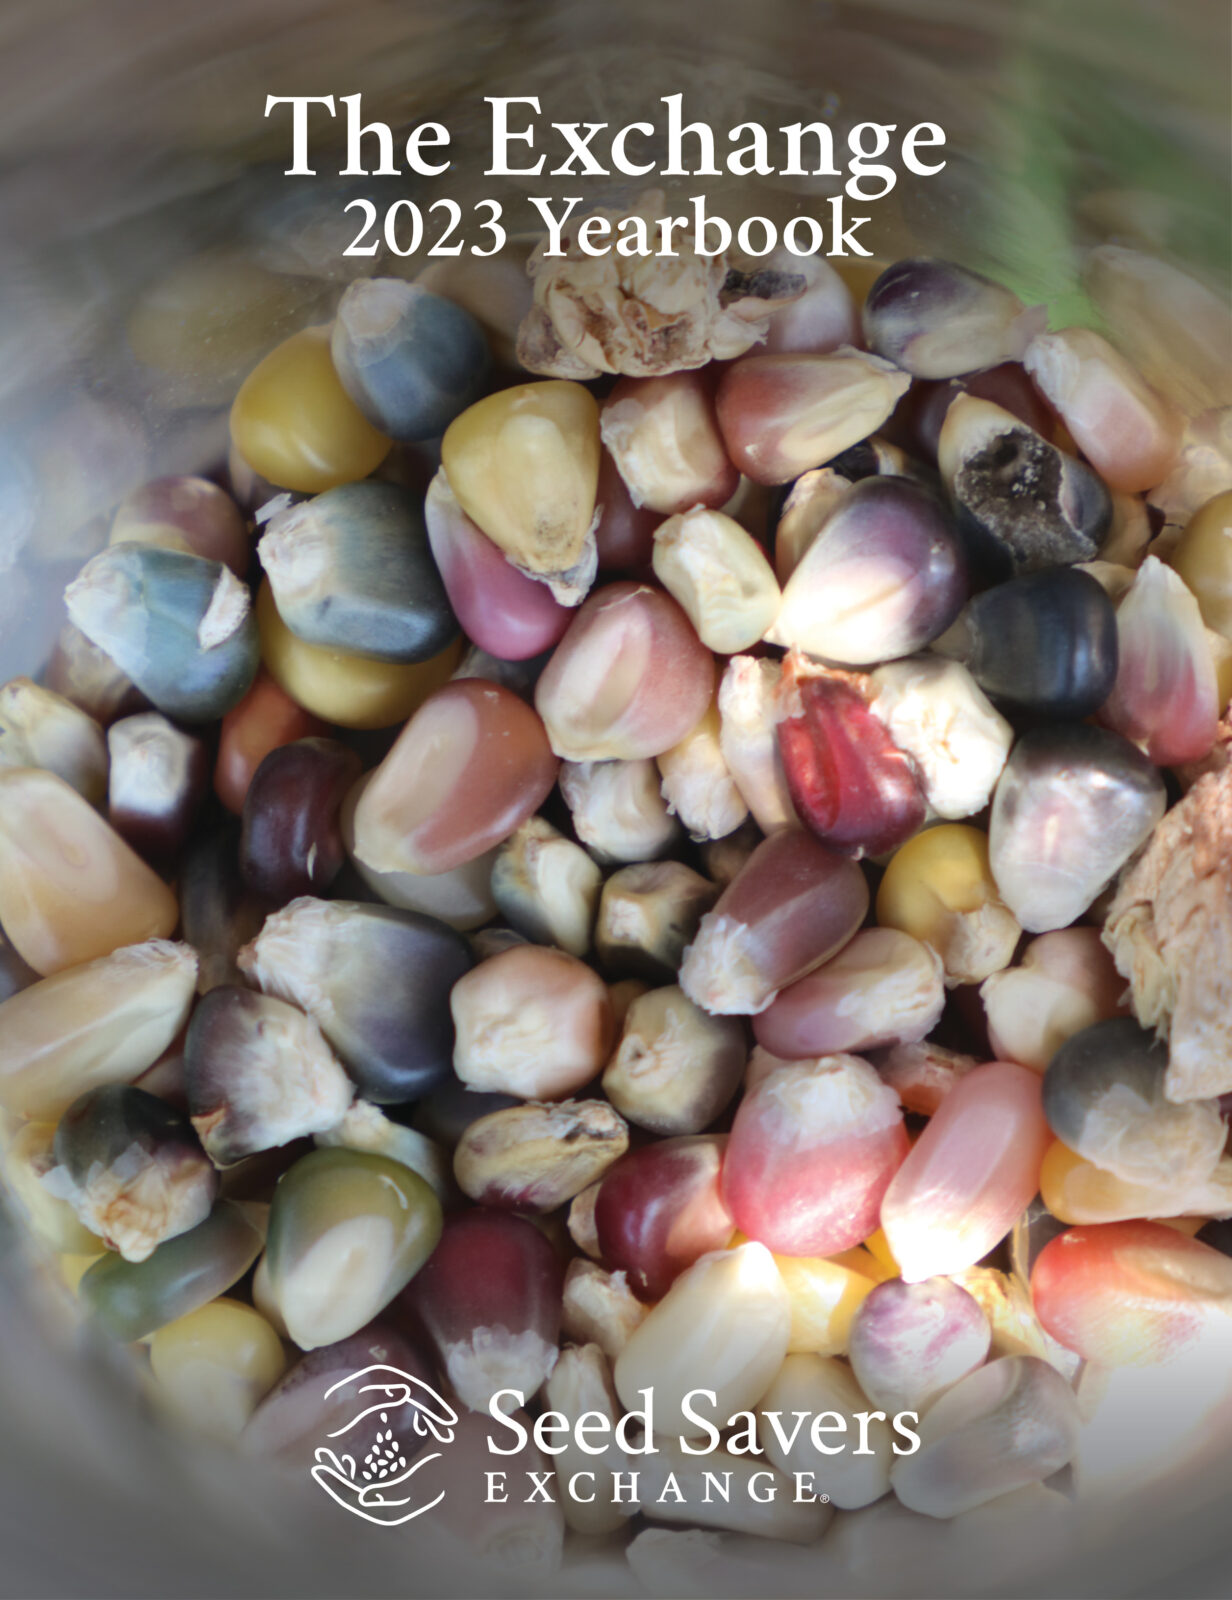 The Exchange 2023 Yearbook